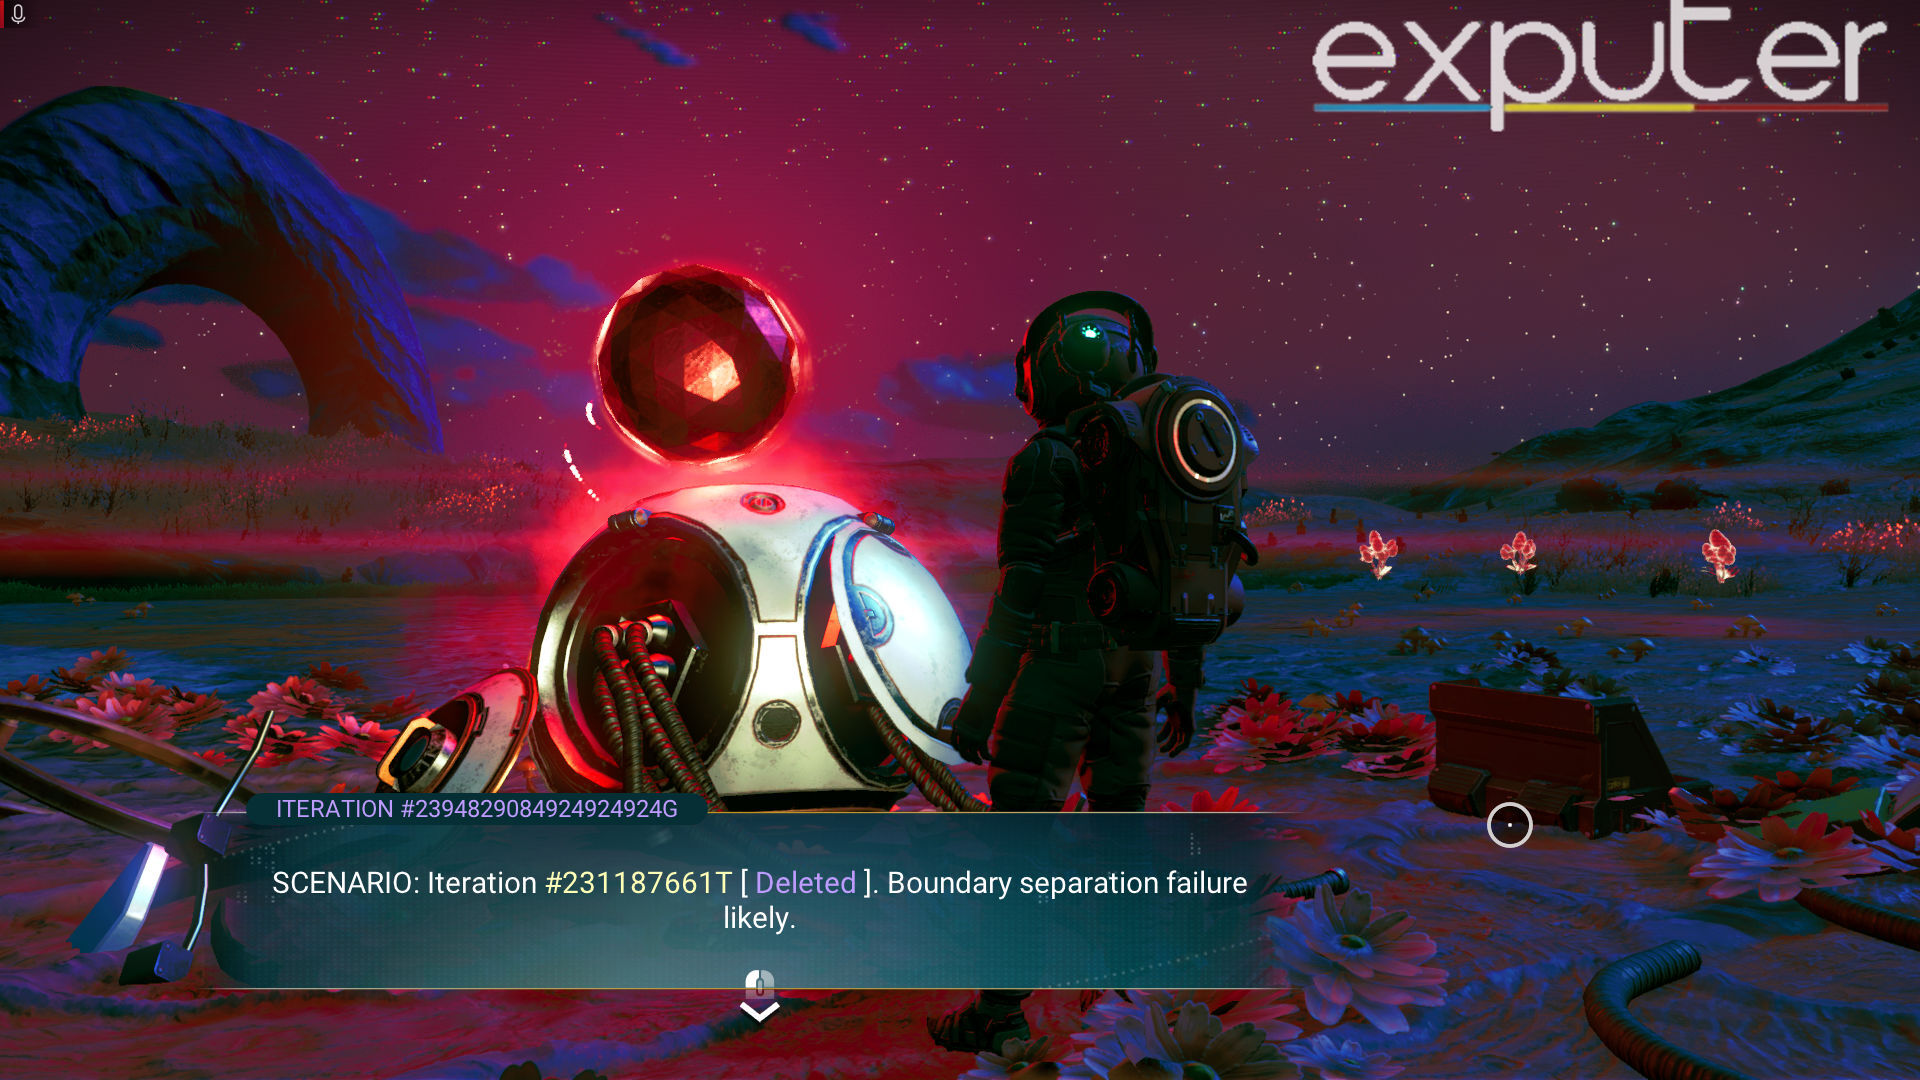 Cryptic messages from crashed vessel reveal more about No Man's Sky lore.